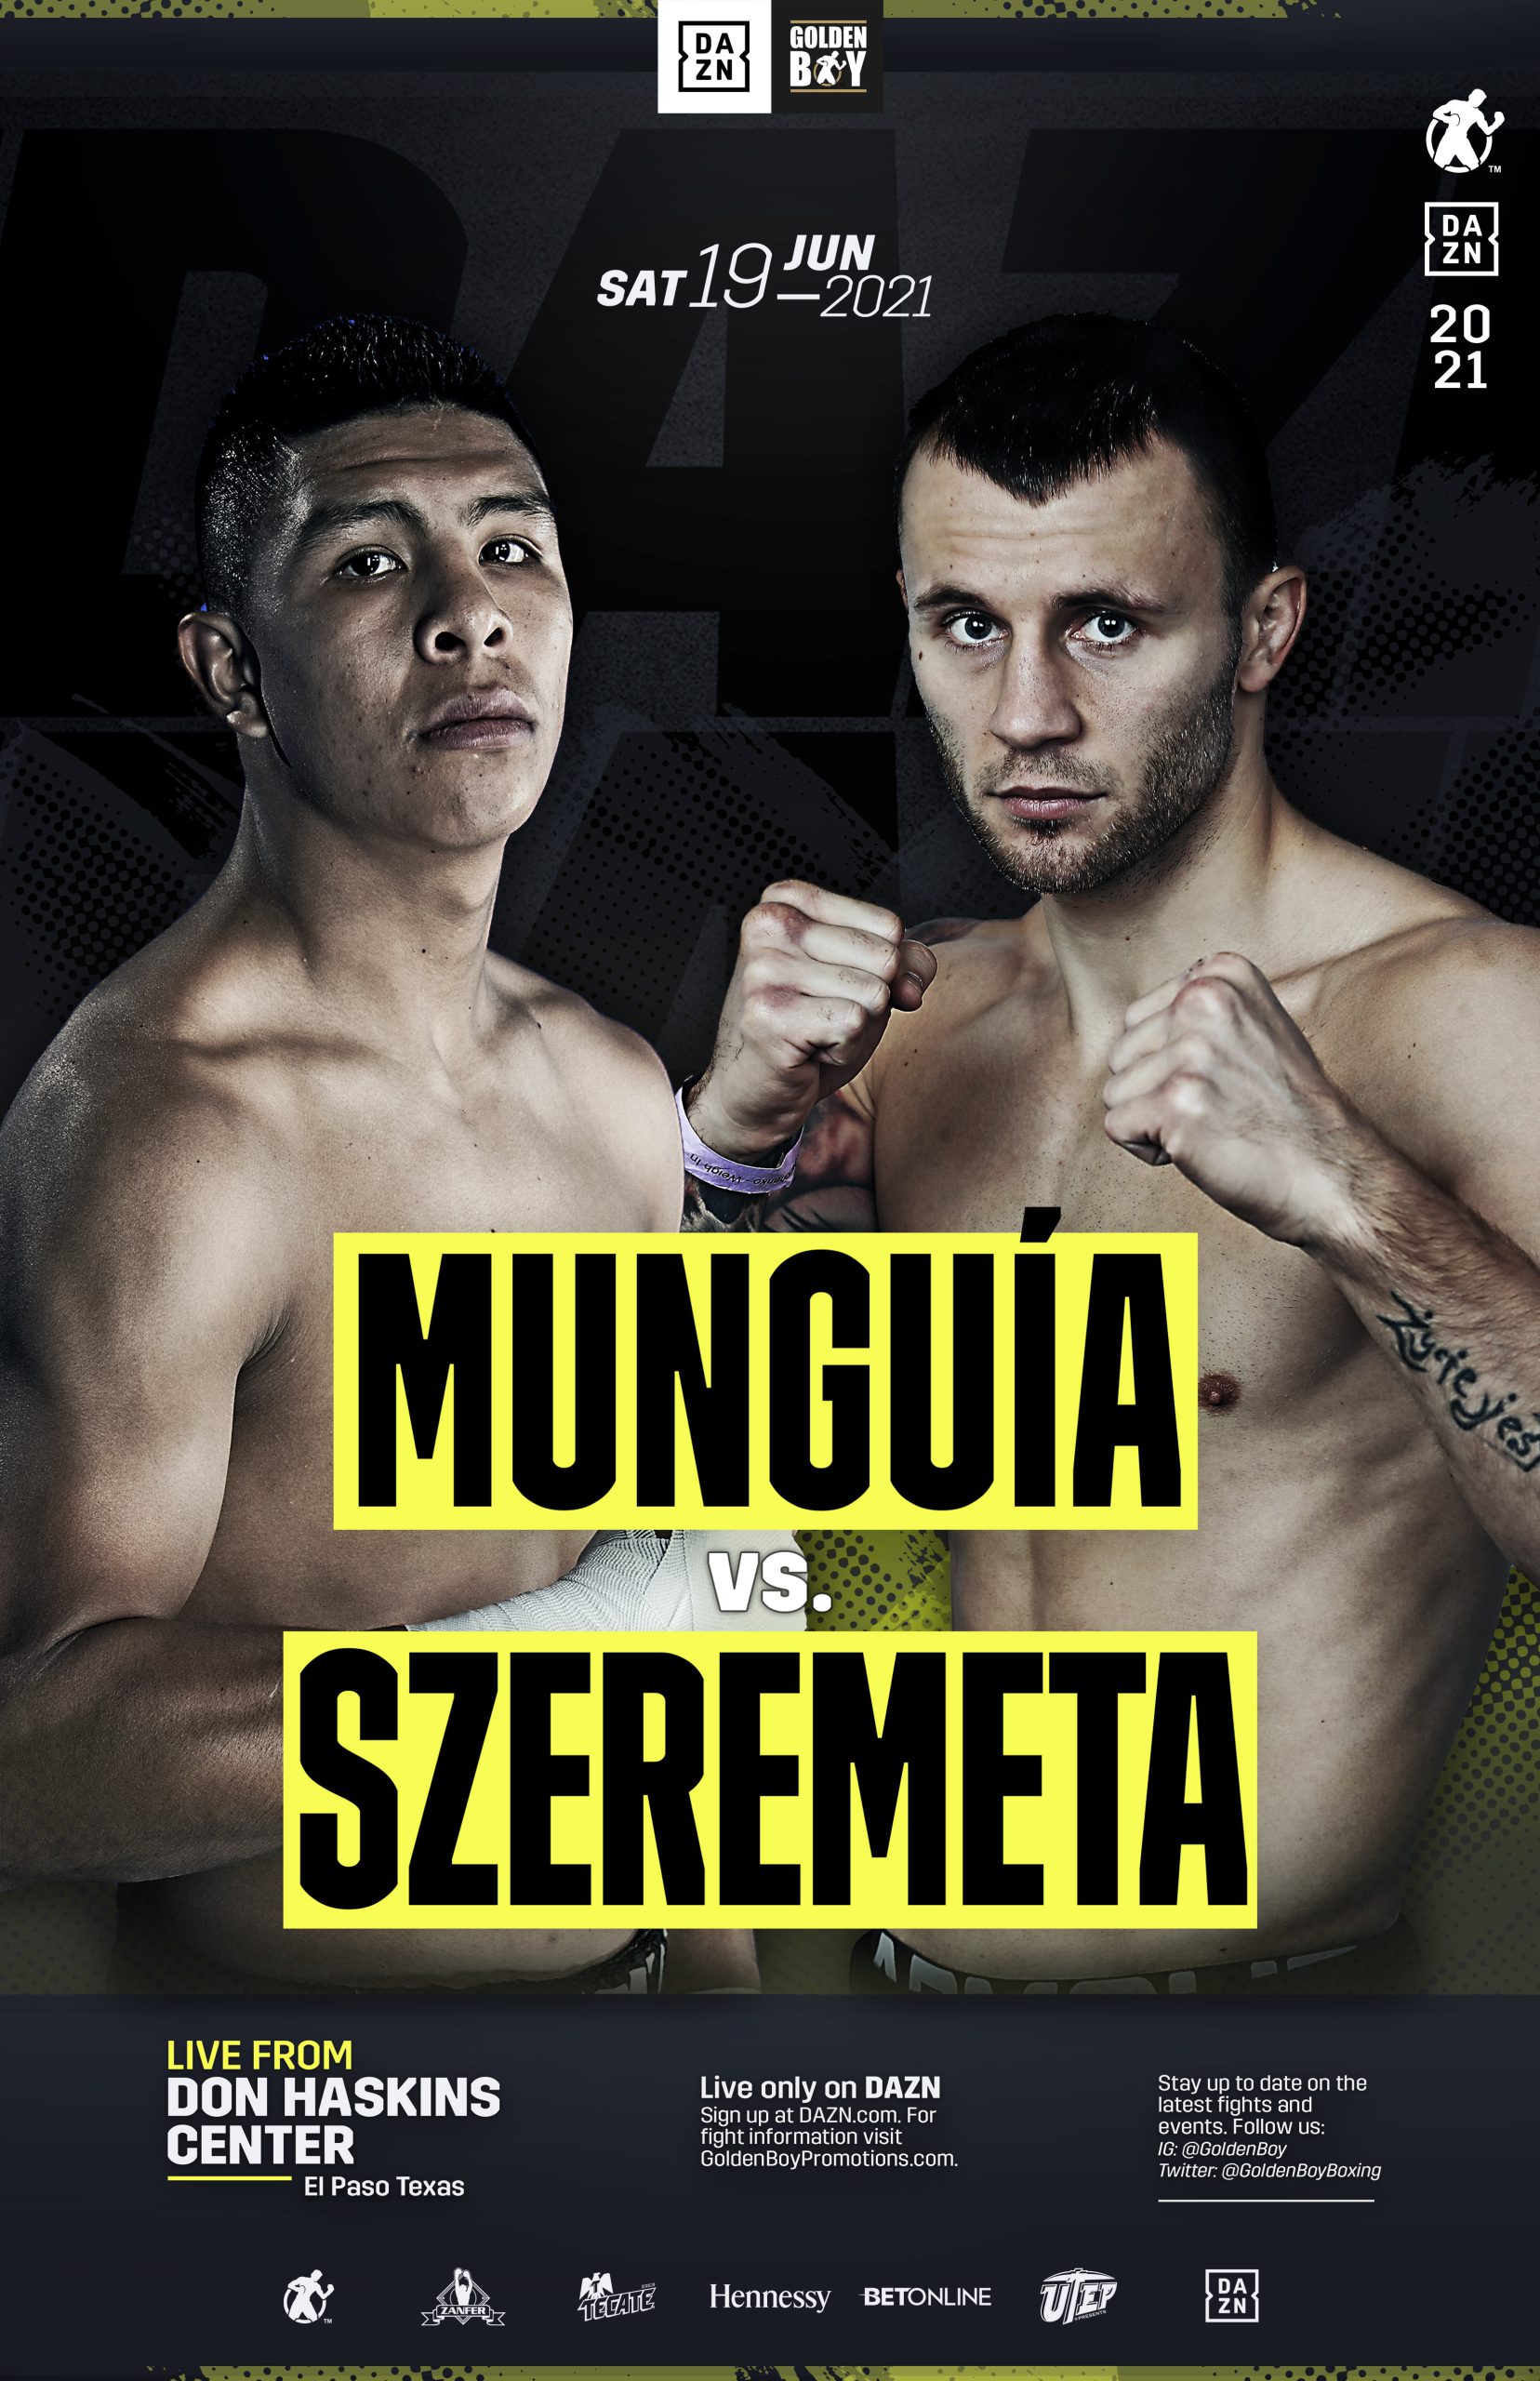 KAMIL SZEREMETA STEPS IN TO FACE JAIME MUNGUIA FOR THE WBO INTERCONTINENTAL MIDDLEWEIGHT CHAMPIONSHIP